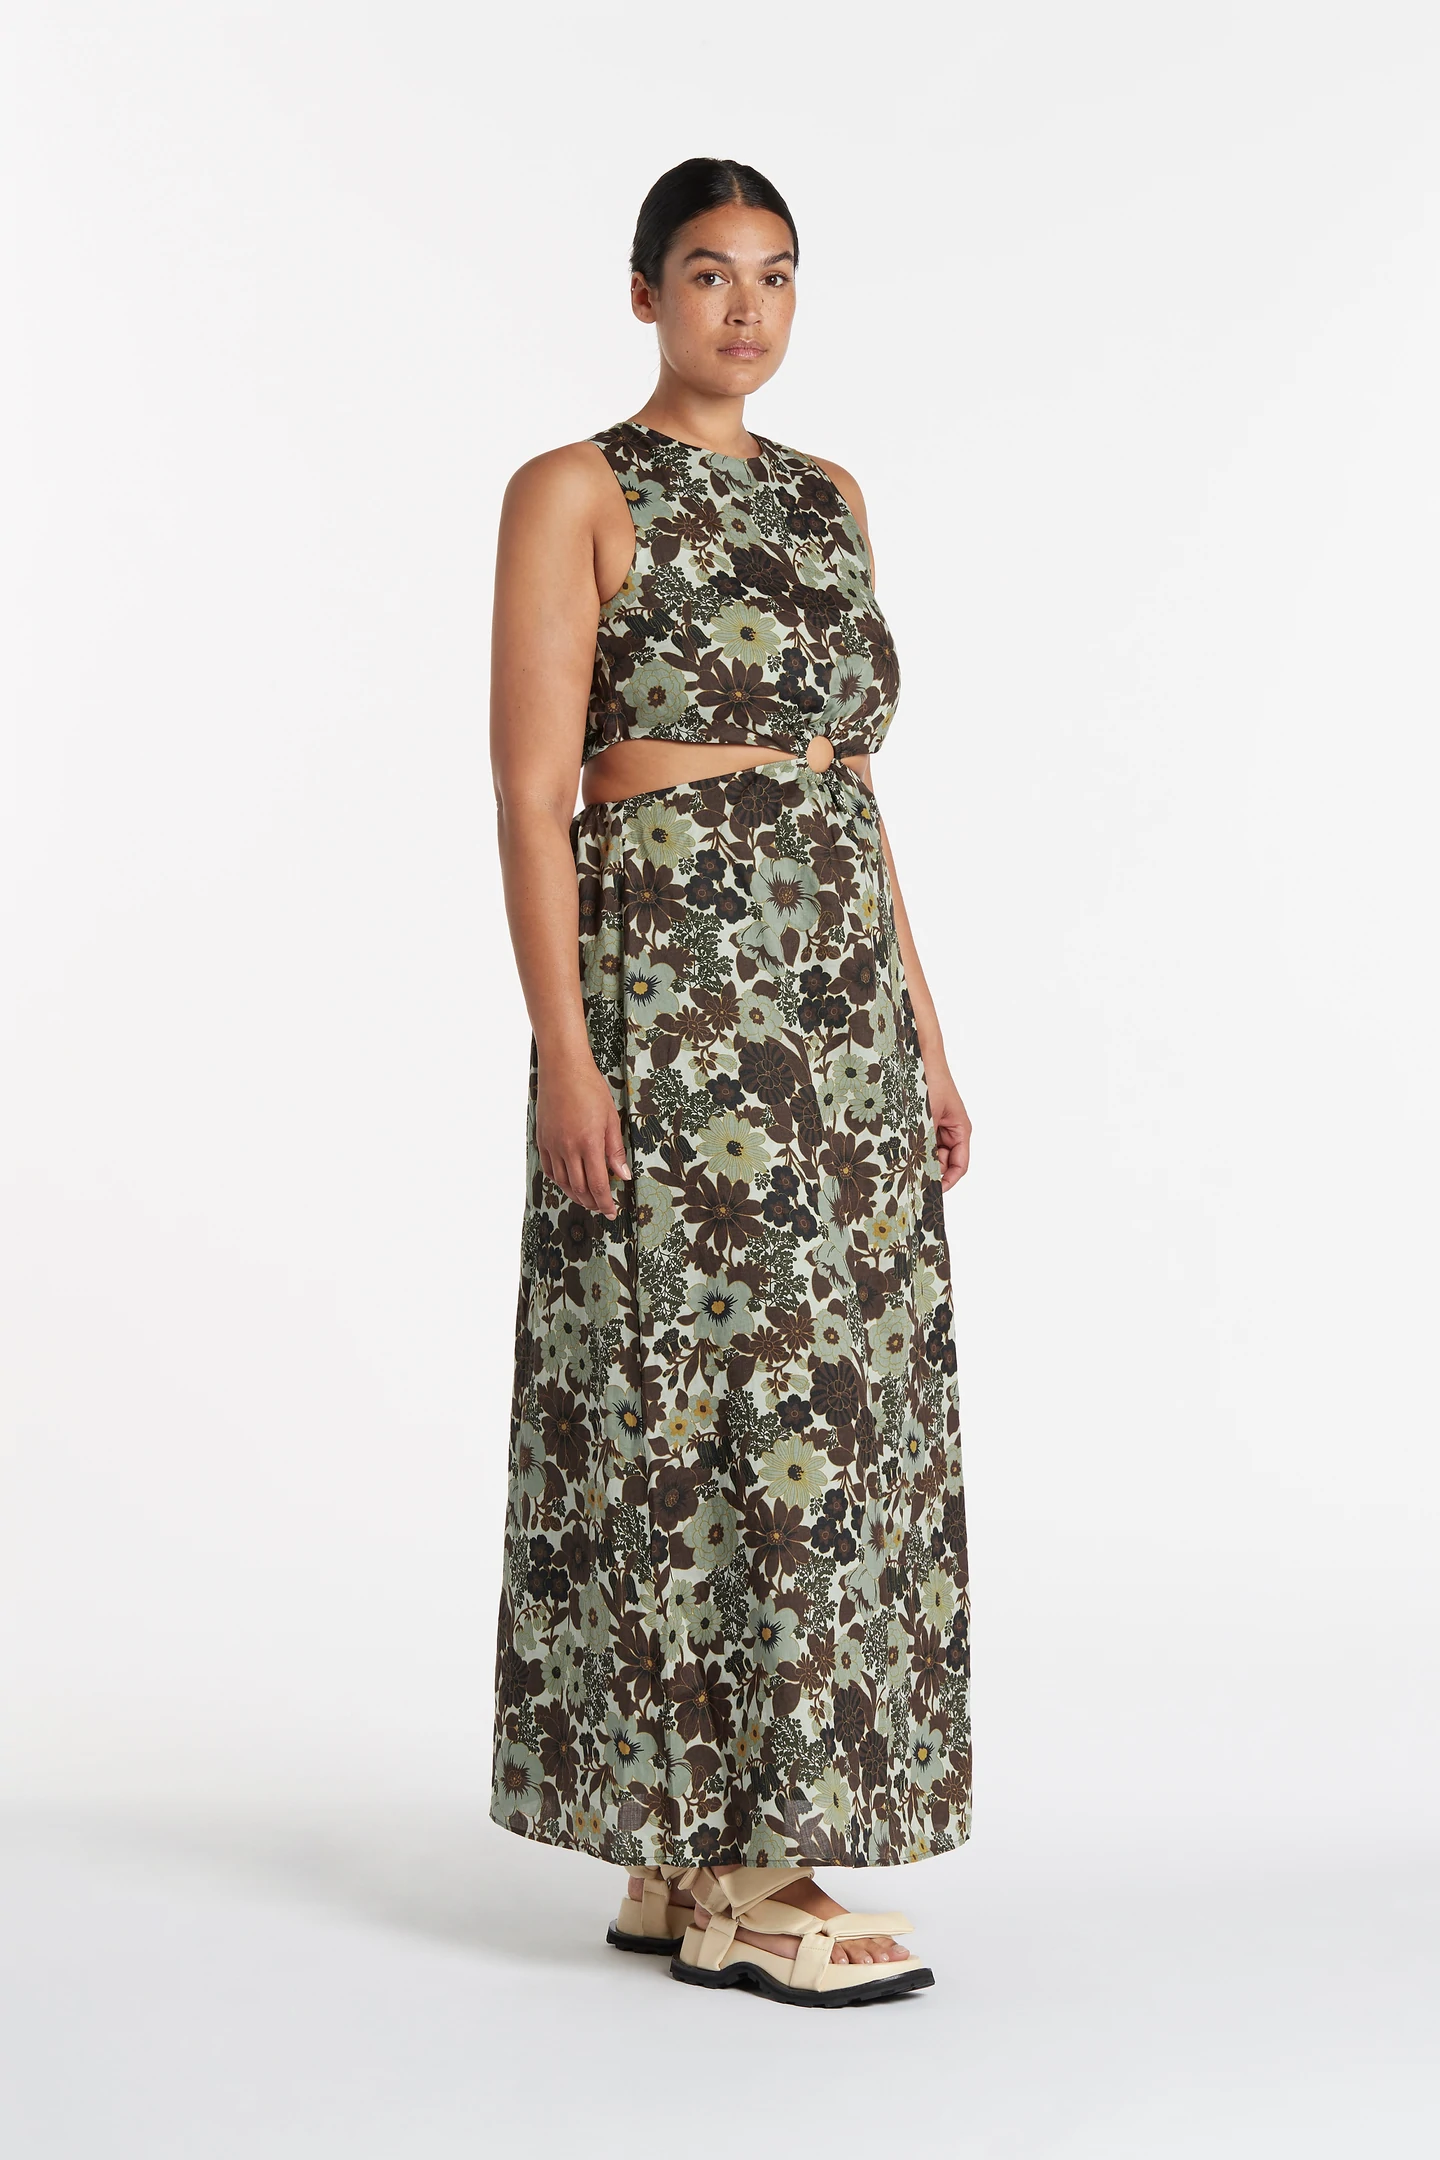 SIR. - CONSTANTINE CUT OUT MIDI DRESS - FLORAL - PRELOVED